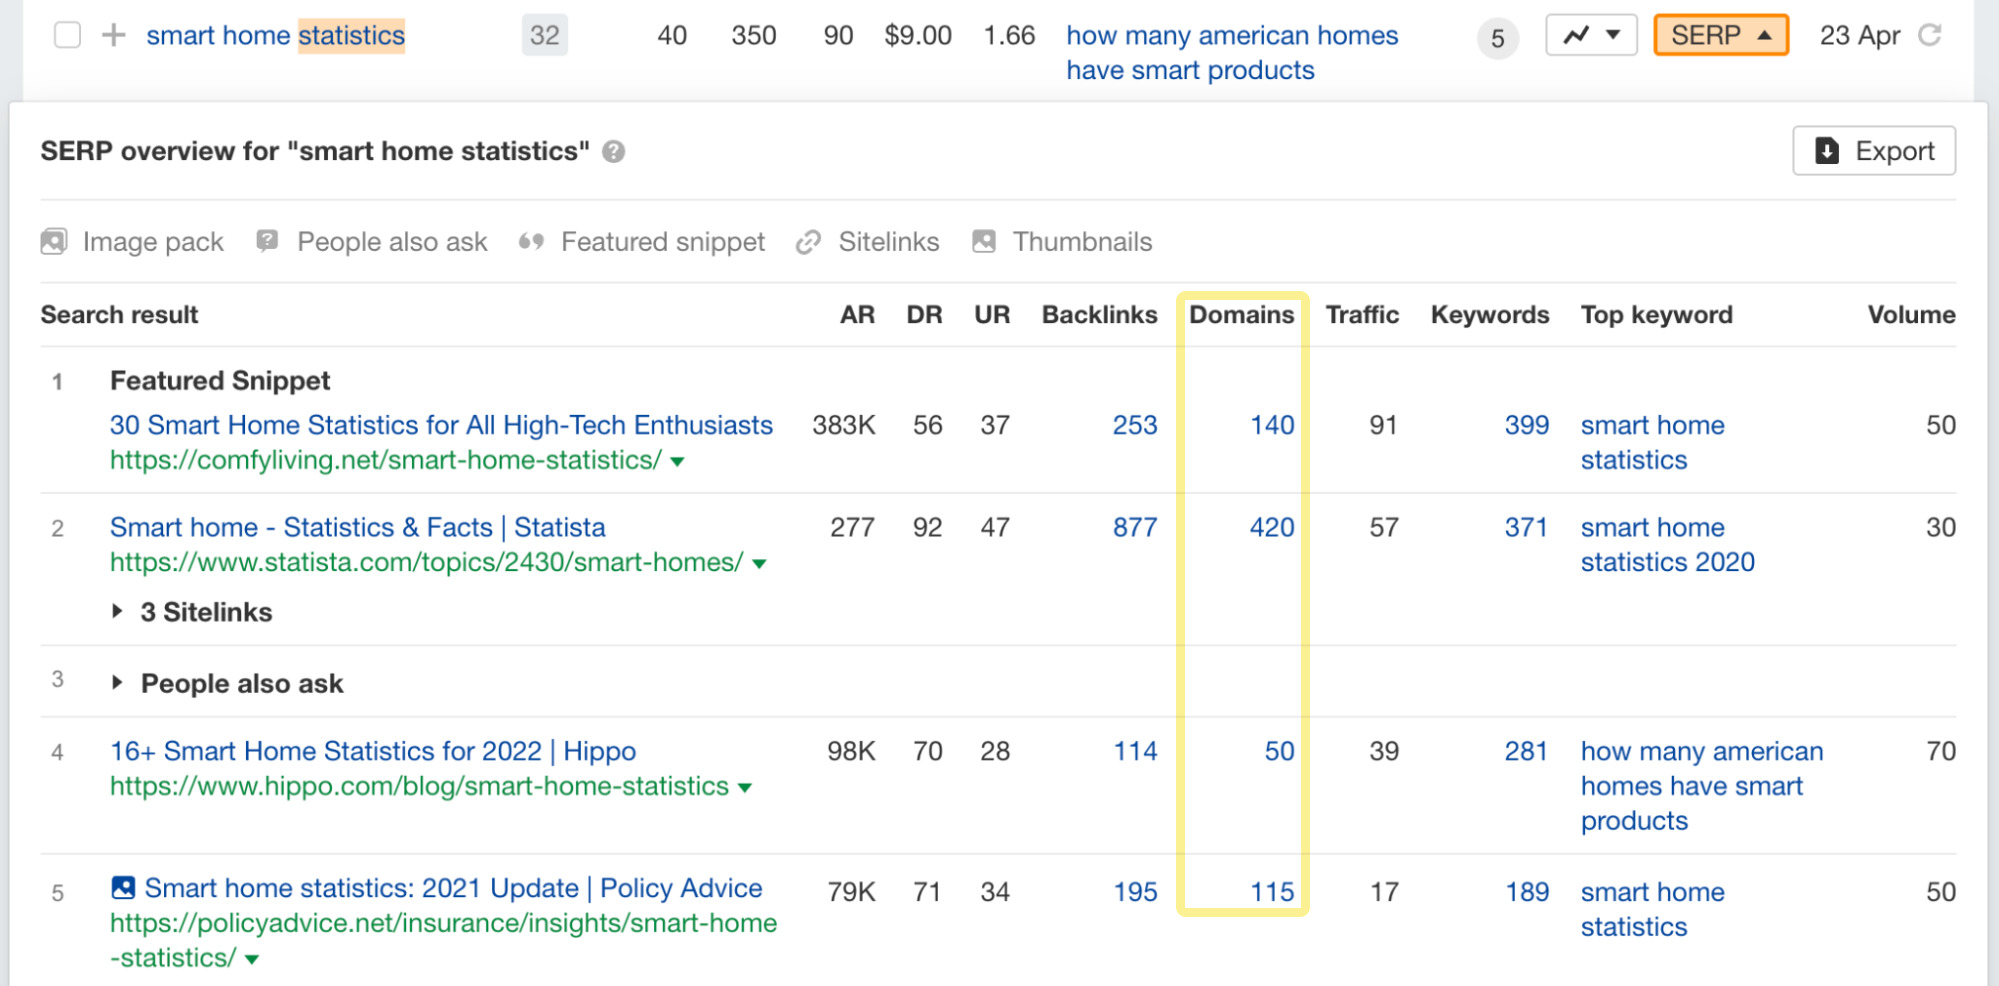 The search results for "smart home statistics" have lots of backlinks